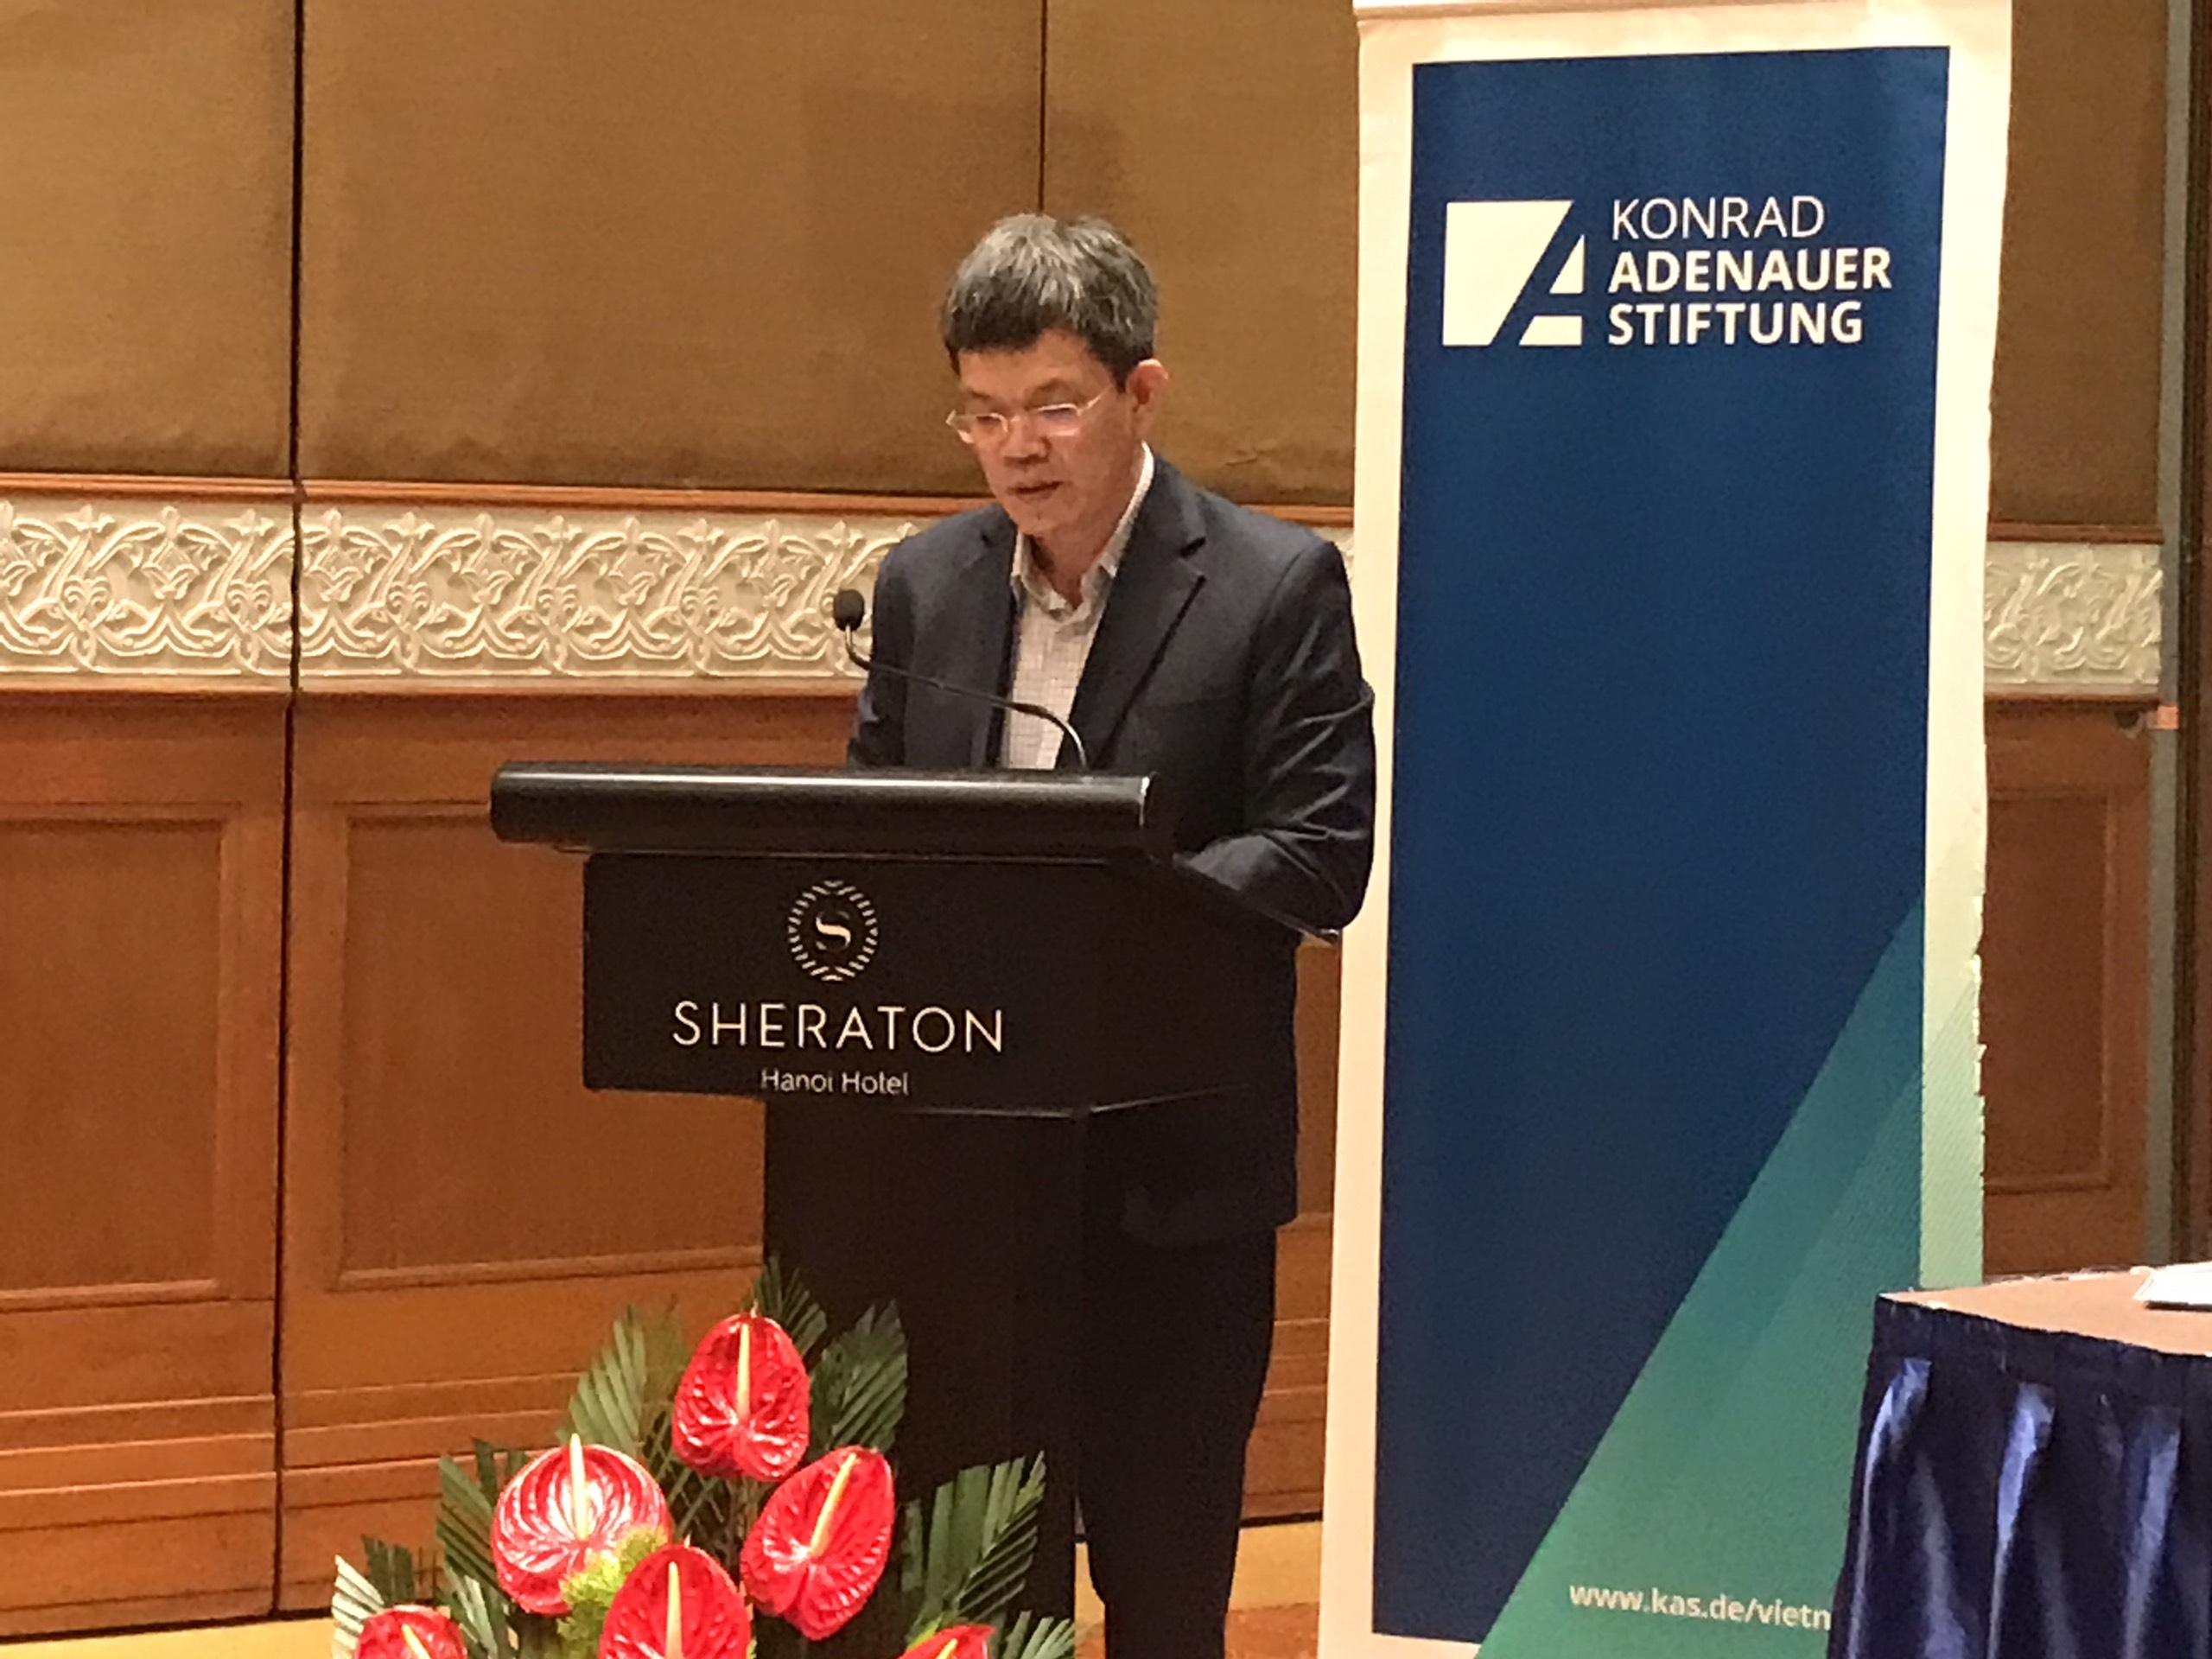 Assoc.Prof.Dr. Dang Minh Duc, Deputy Director of the Institute of European Studies, speaking at the opening of the Workshop